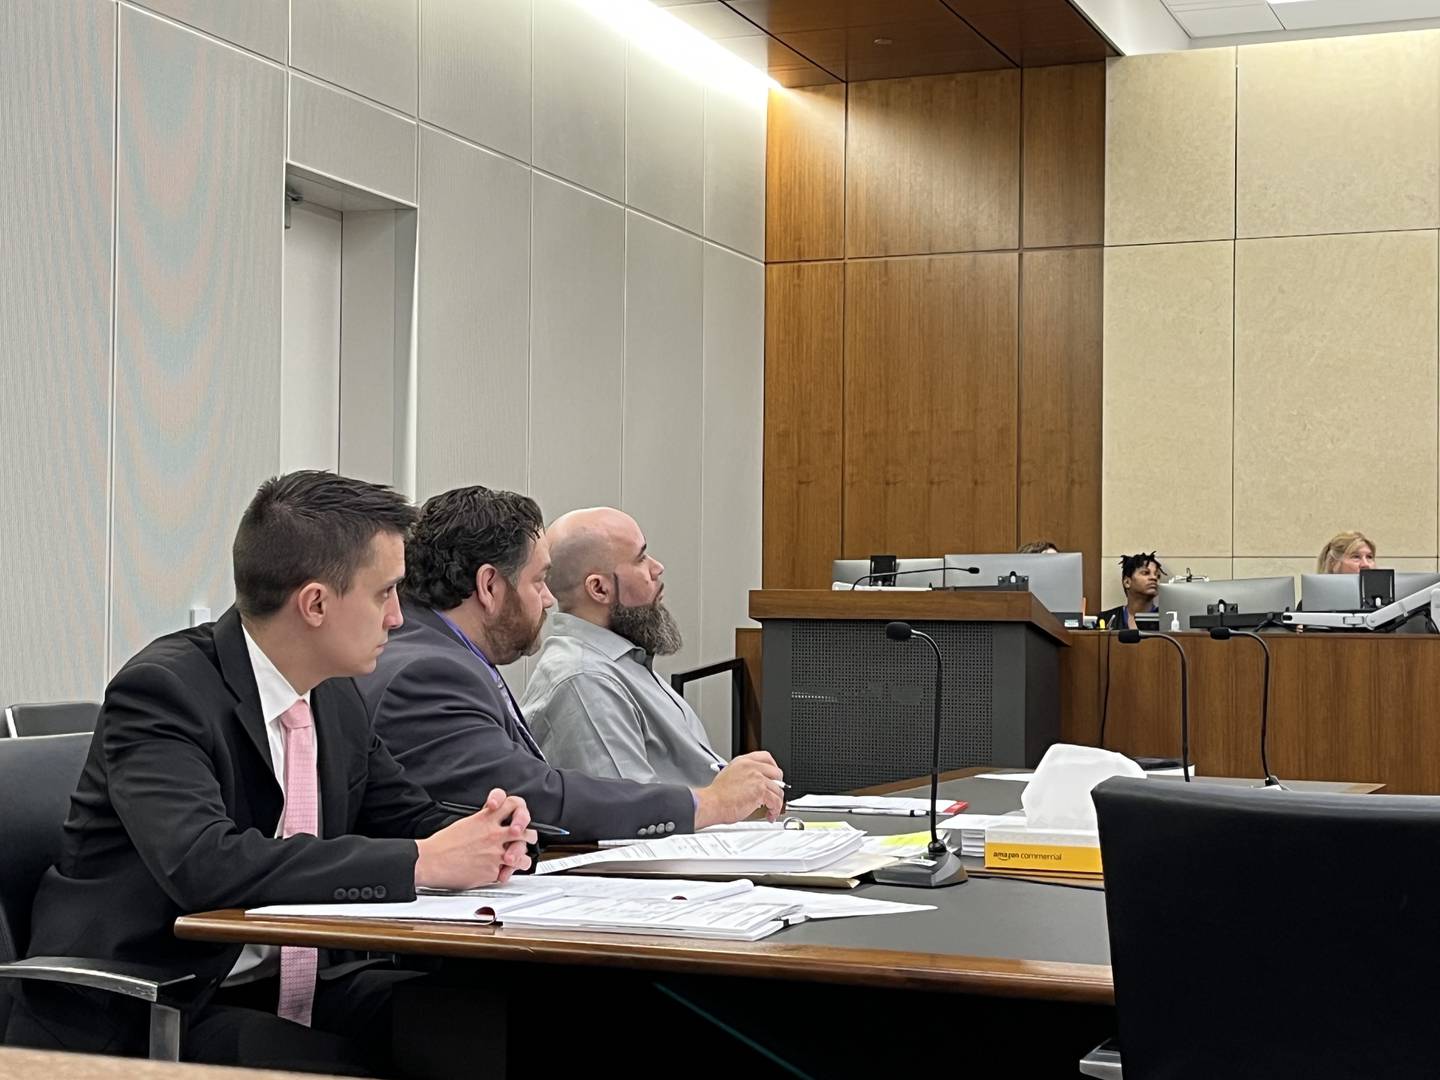 Defense attorneys Zack Strupeck (left) and Phil Villasenor sit with their client, Jermaine Mandley, 47, of Bolingbrook, in a courtroom during a trial on Wednesday, Aug. 16, 2023. Mandley faces charges of shooting and killing Maya Smith on Jan. 7, 2023.